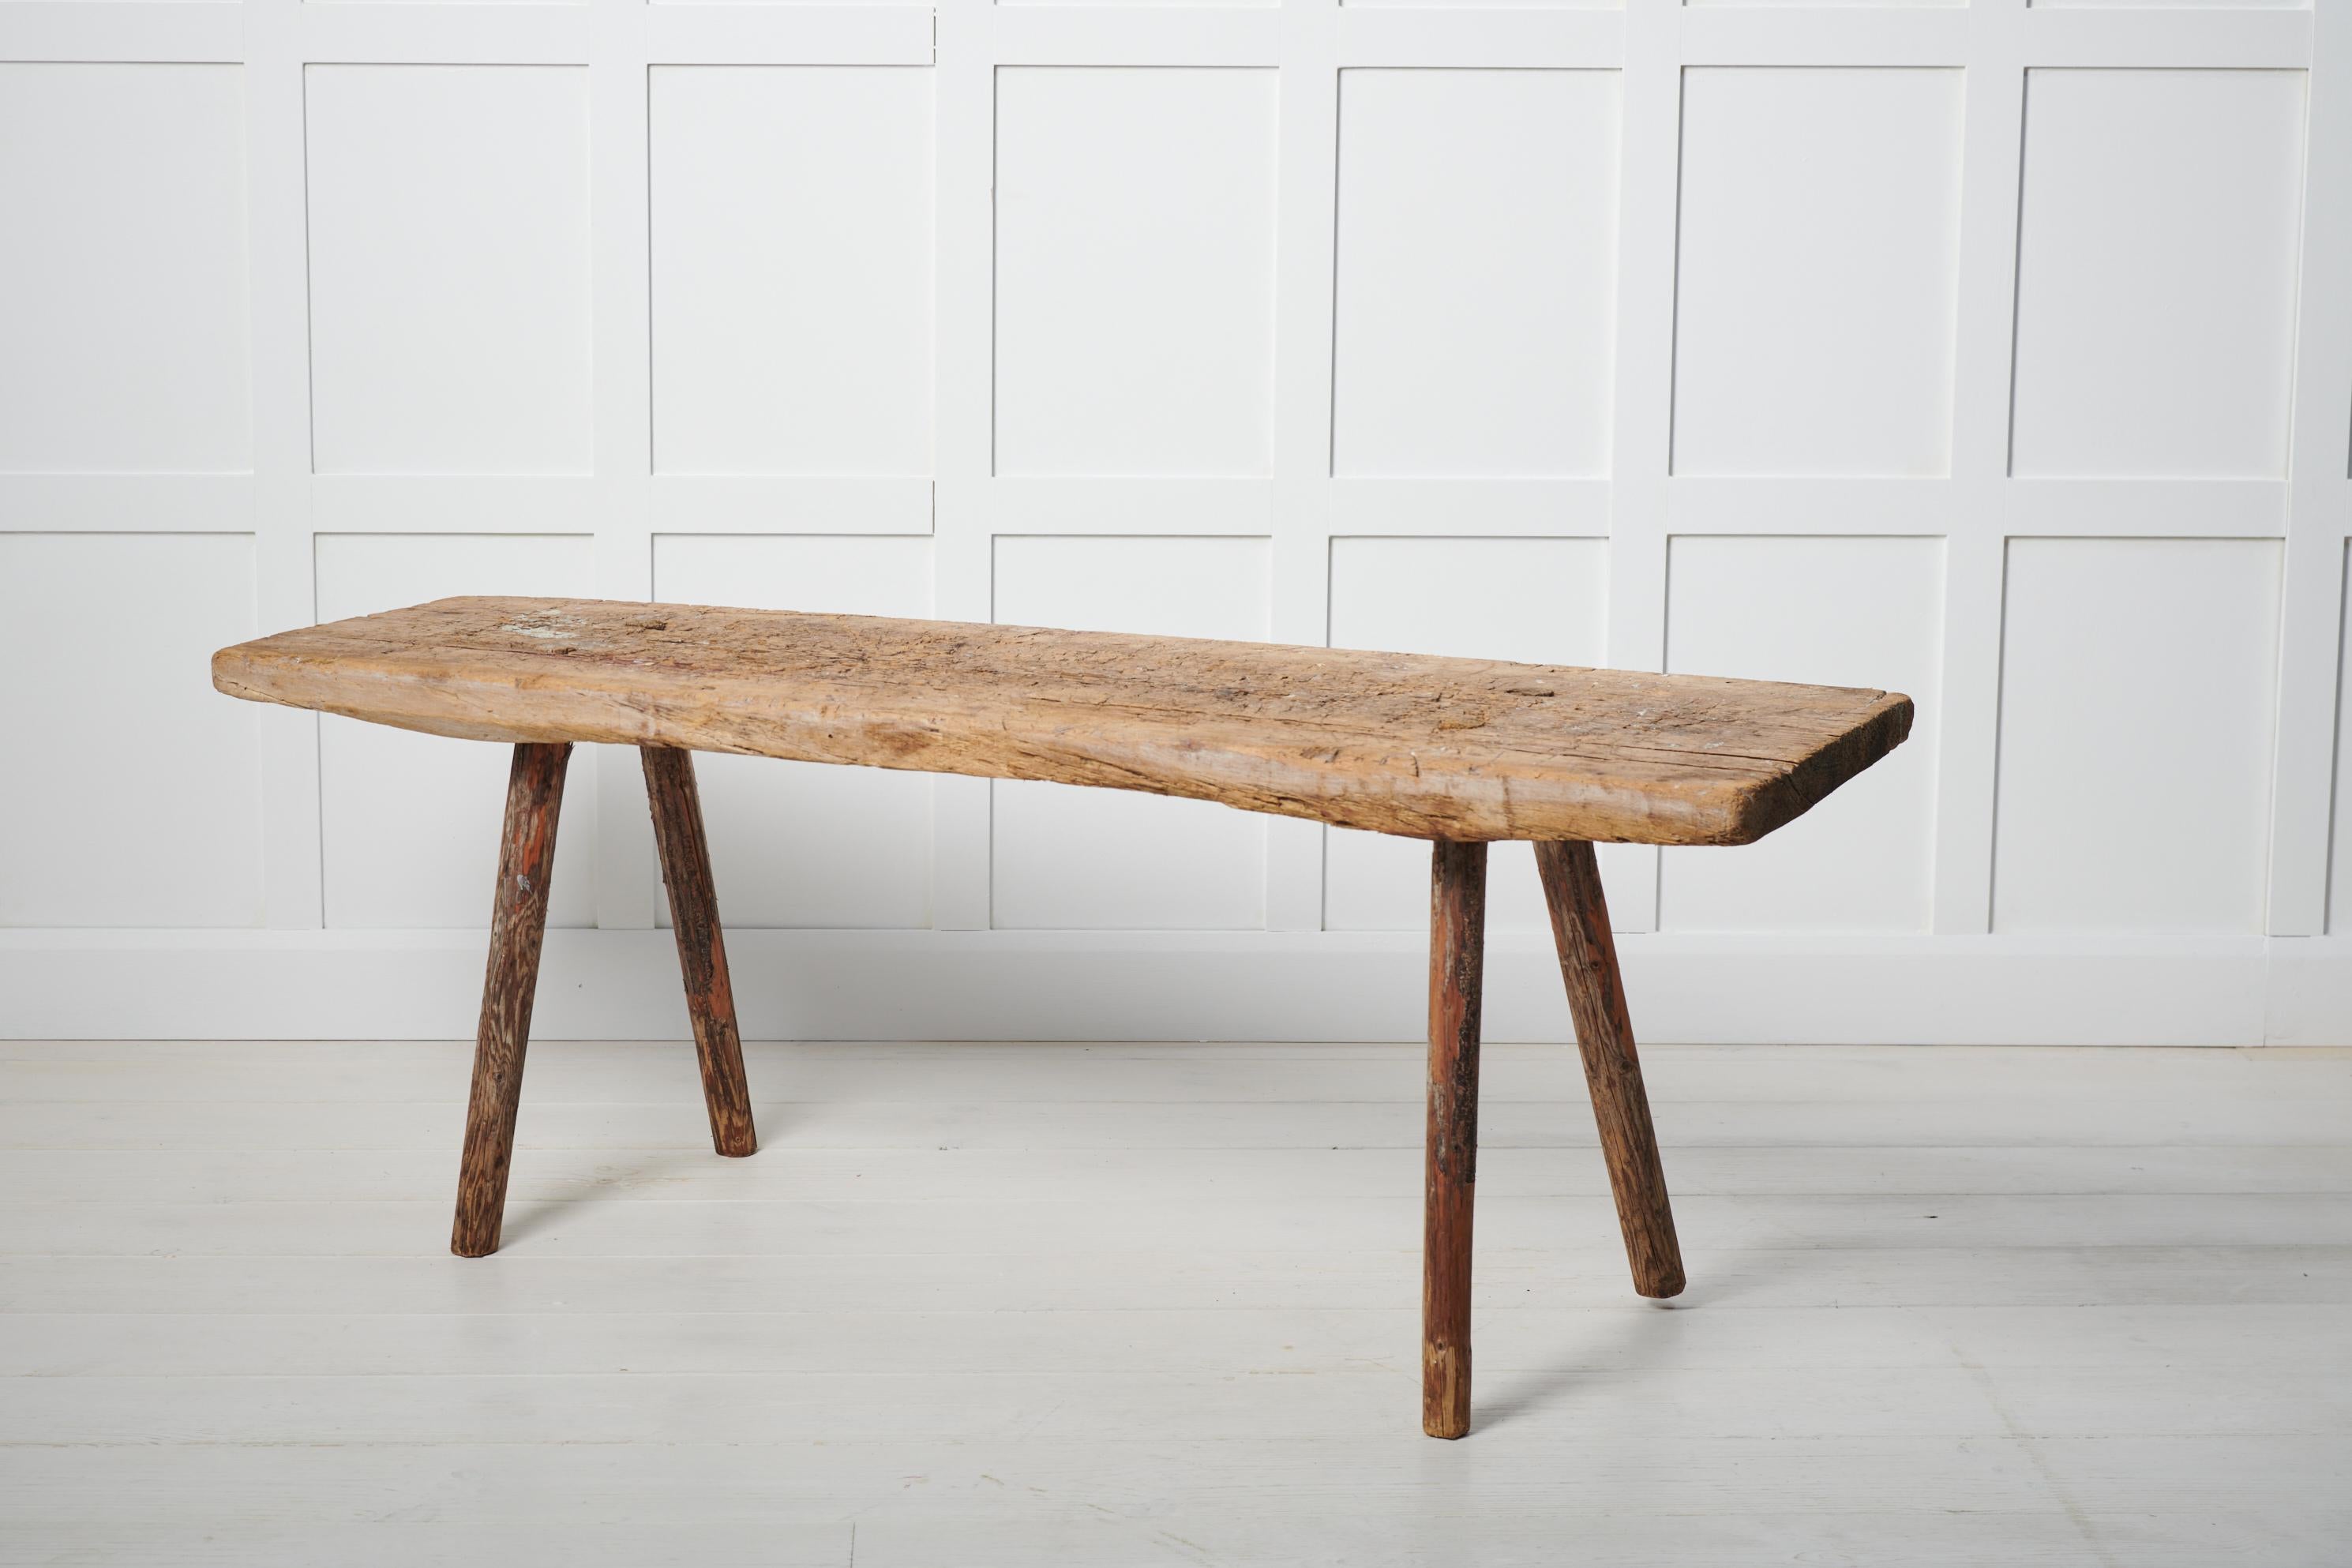 Antique primitive Swedish bench in folk art from northern Sweden. The bench is made during the first few years of the 19th century, around 1810 to 1820. The bench is one of the simplest and purest forms of seating. A wooden board with four legs made